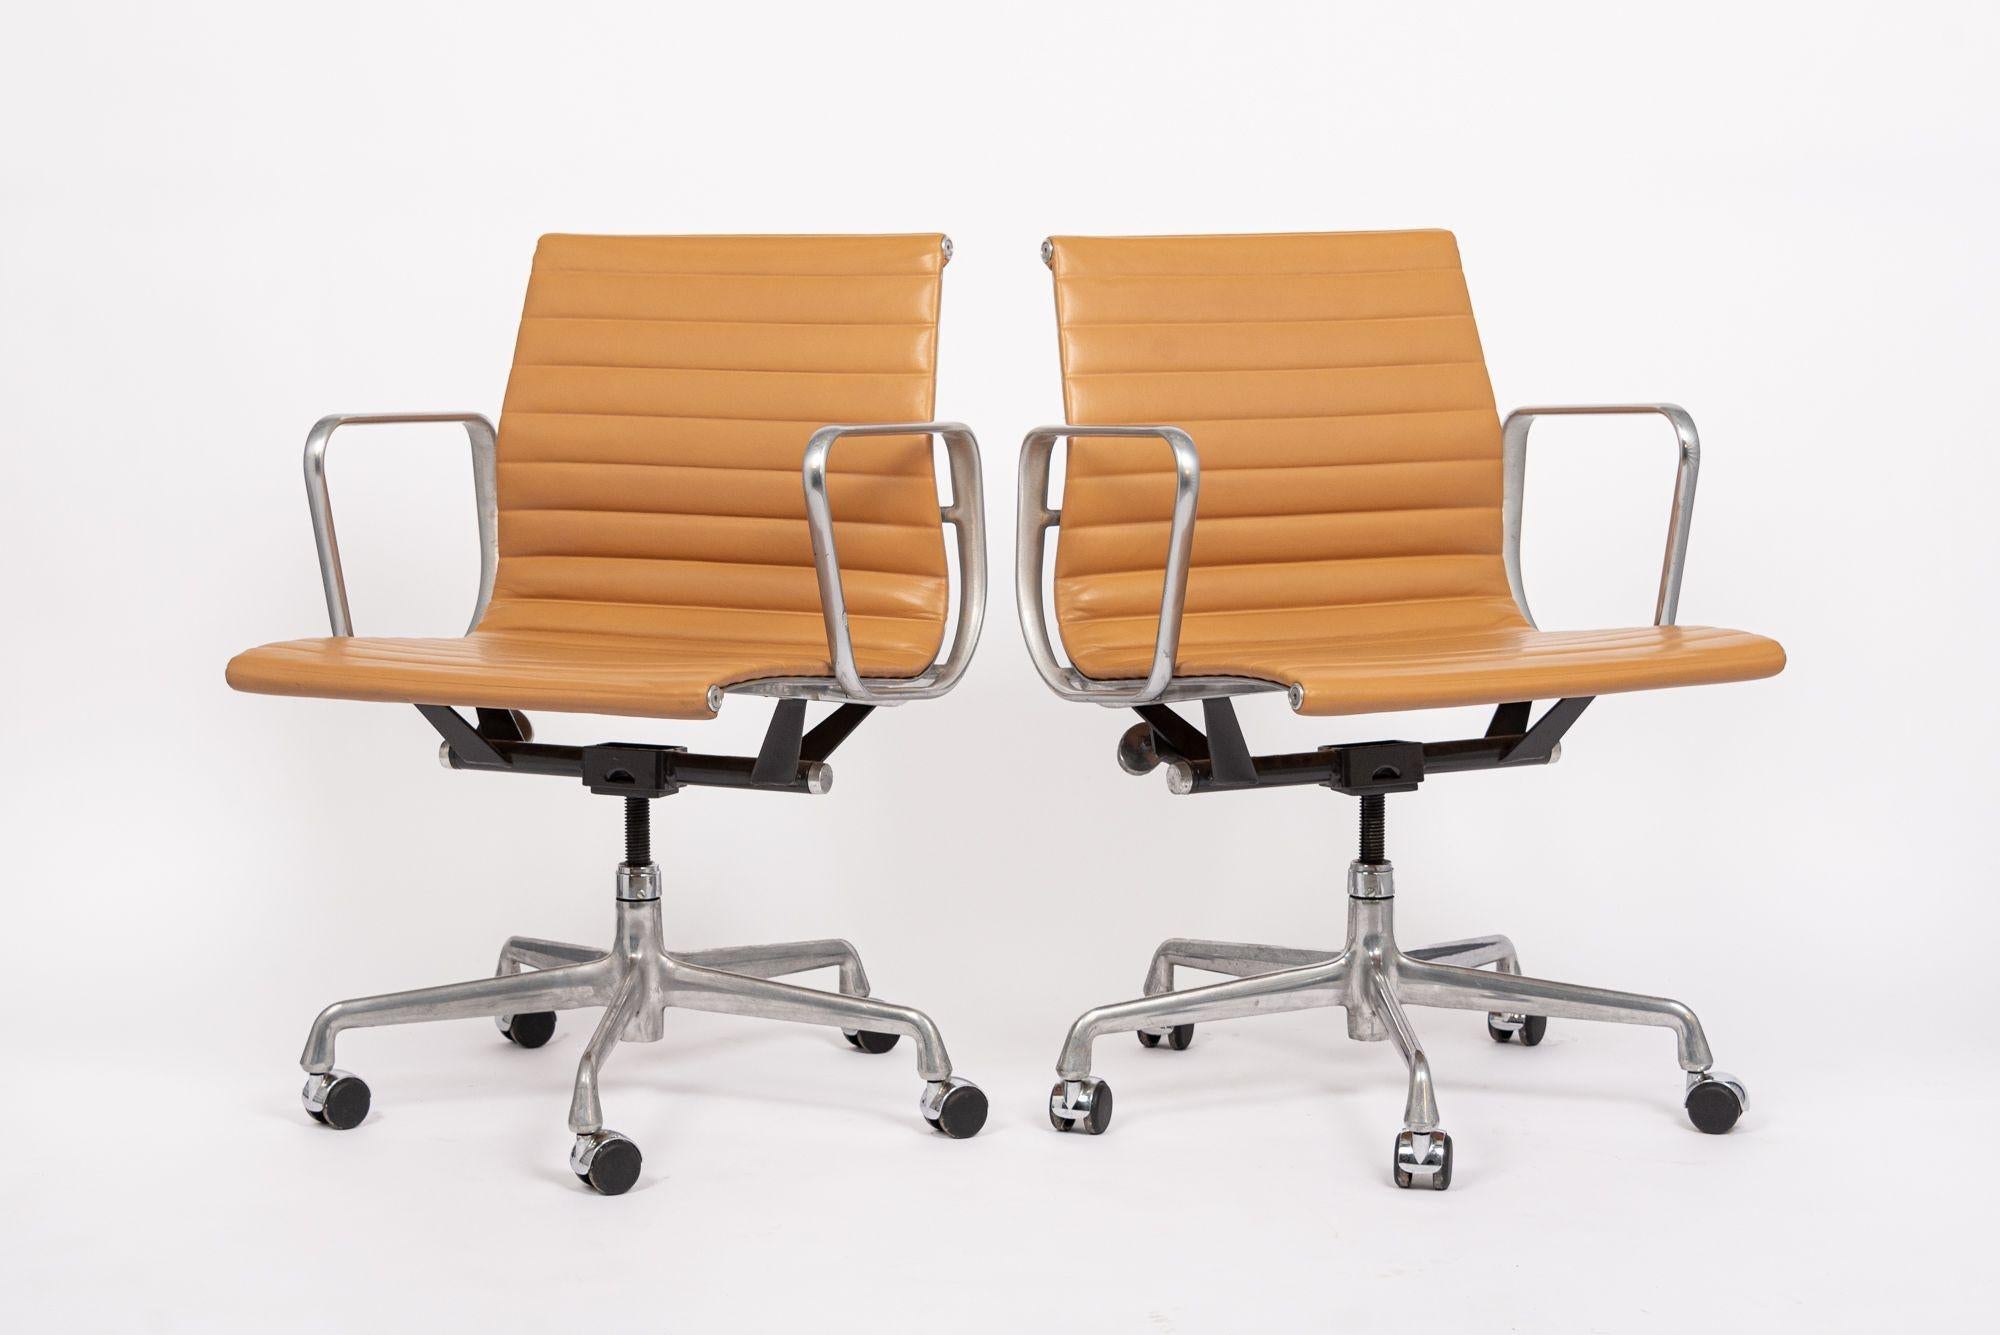 The Aluminum Group Management office chairs designed by Charles & Ray Eames for Herman Miller are from the Eames Aluminum Group Collection. These distinctive chairs resulted from the Eames's experimentation with aluminum, which became more